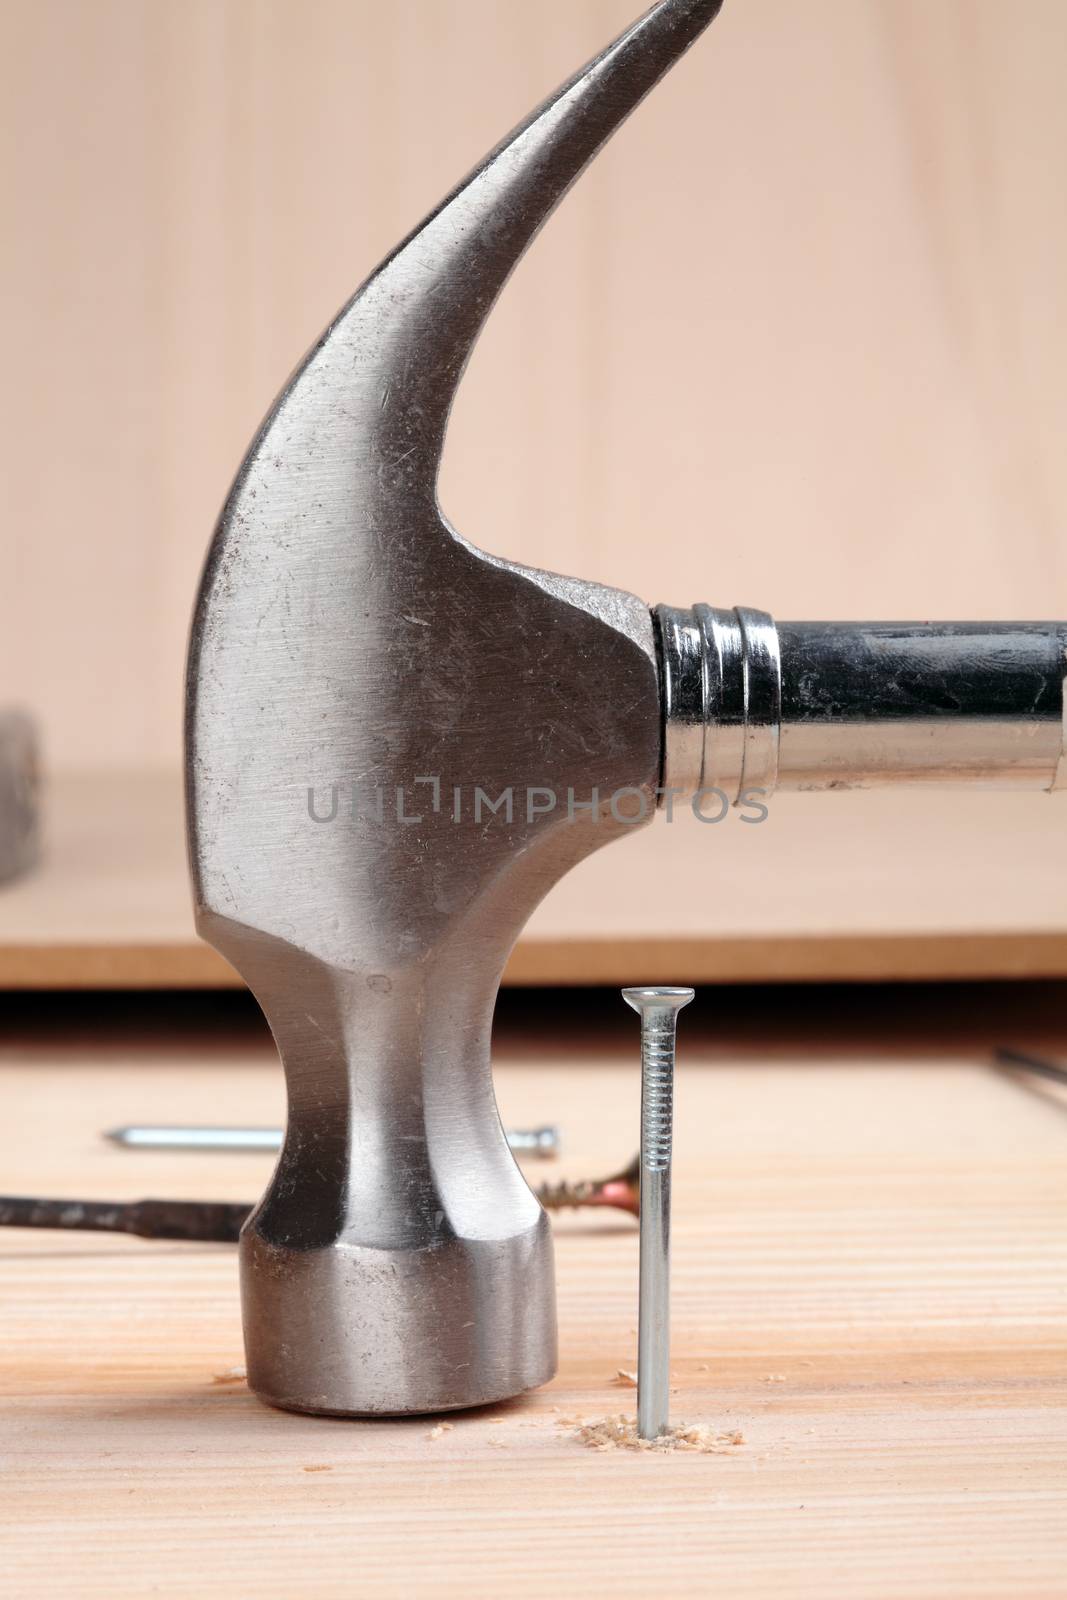 detail of a nail and a hammer